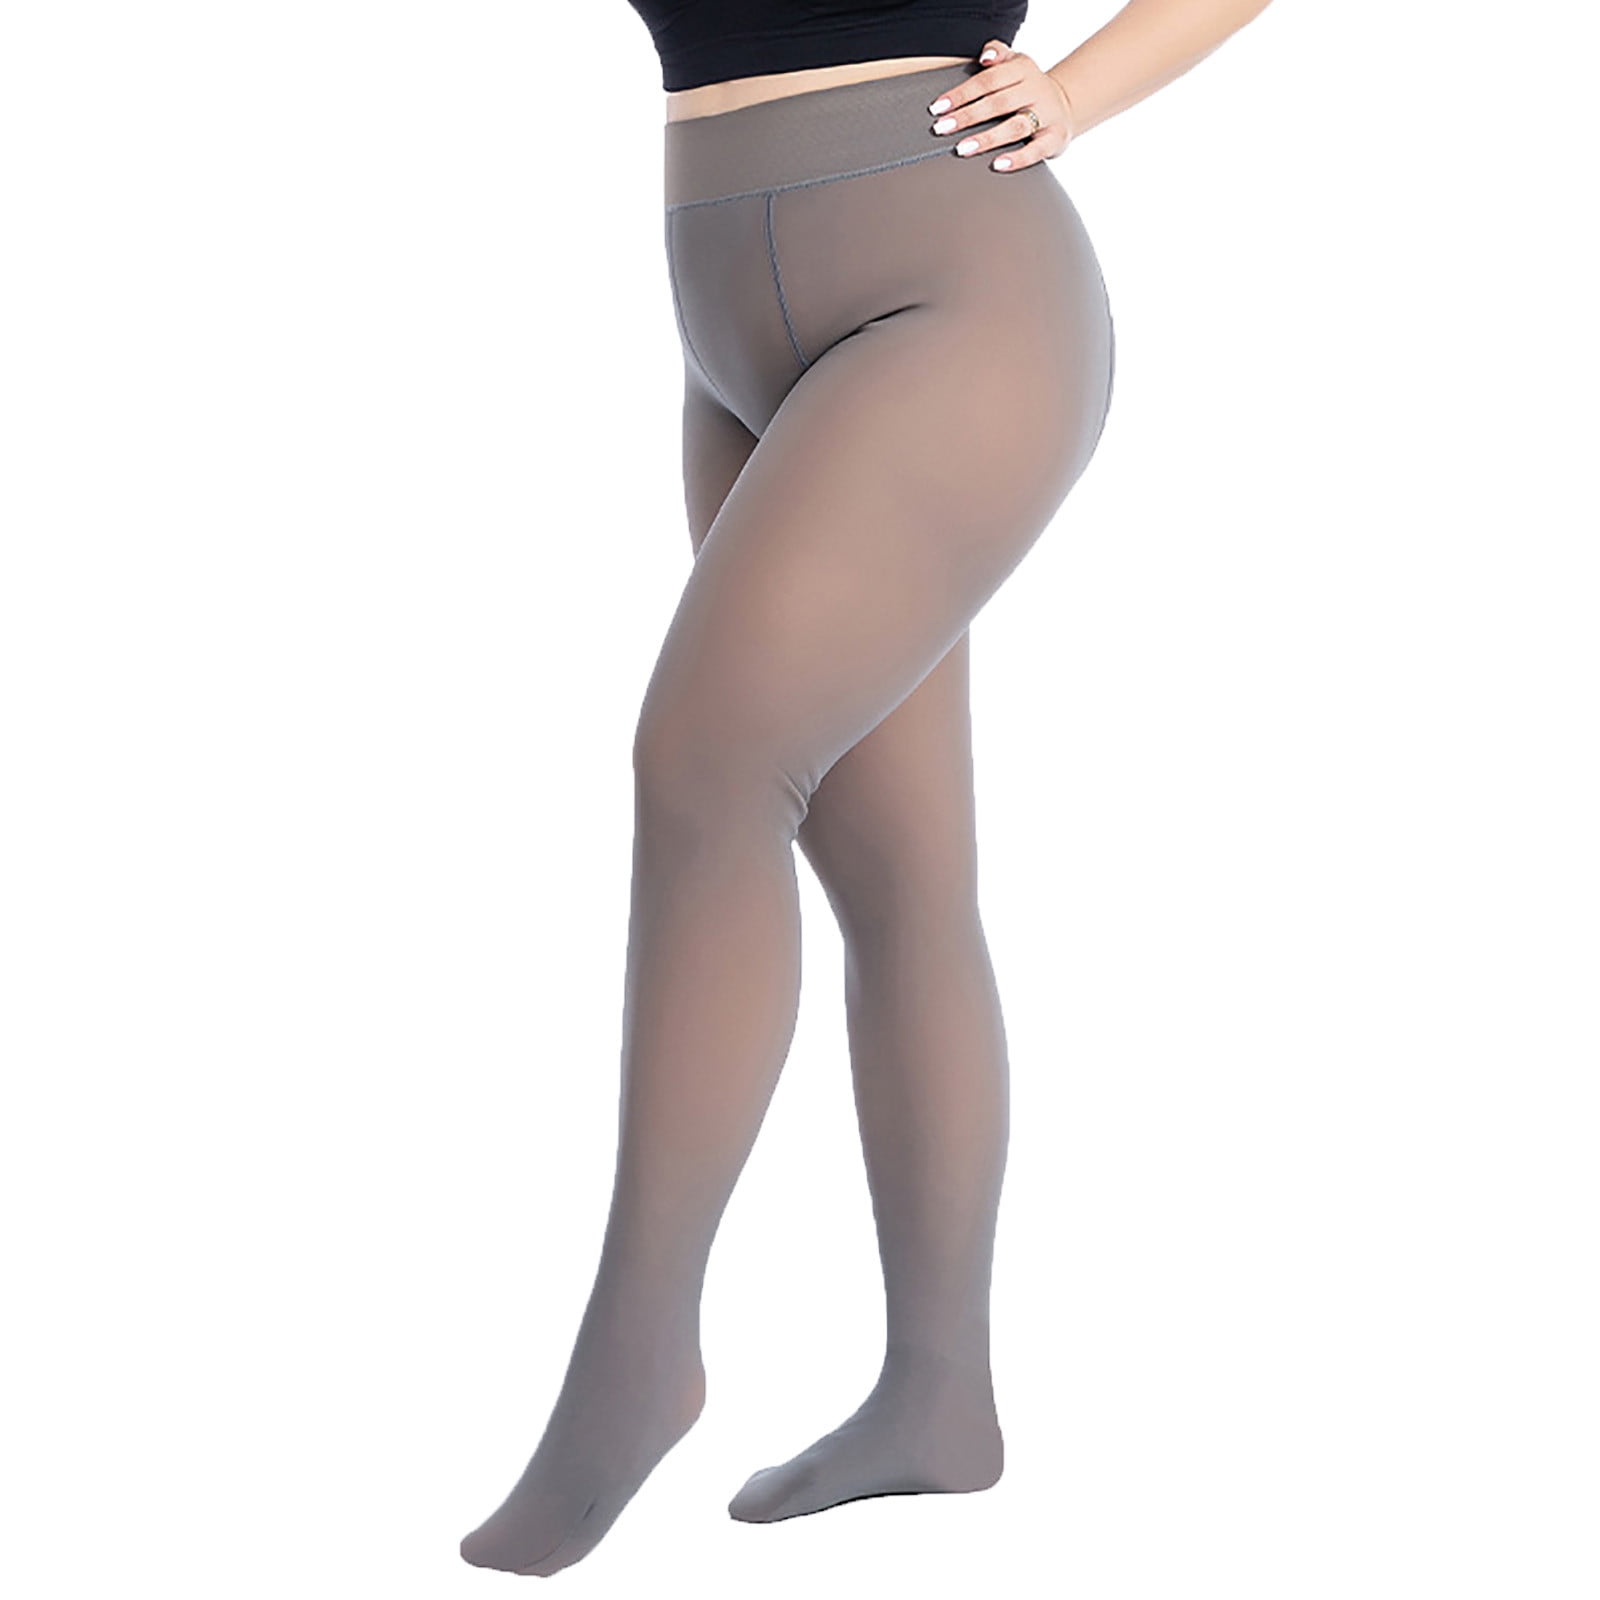 Anesha women soft fleece lined fake translucent thick tights